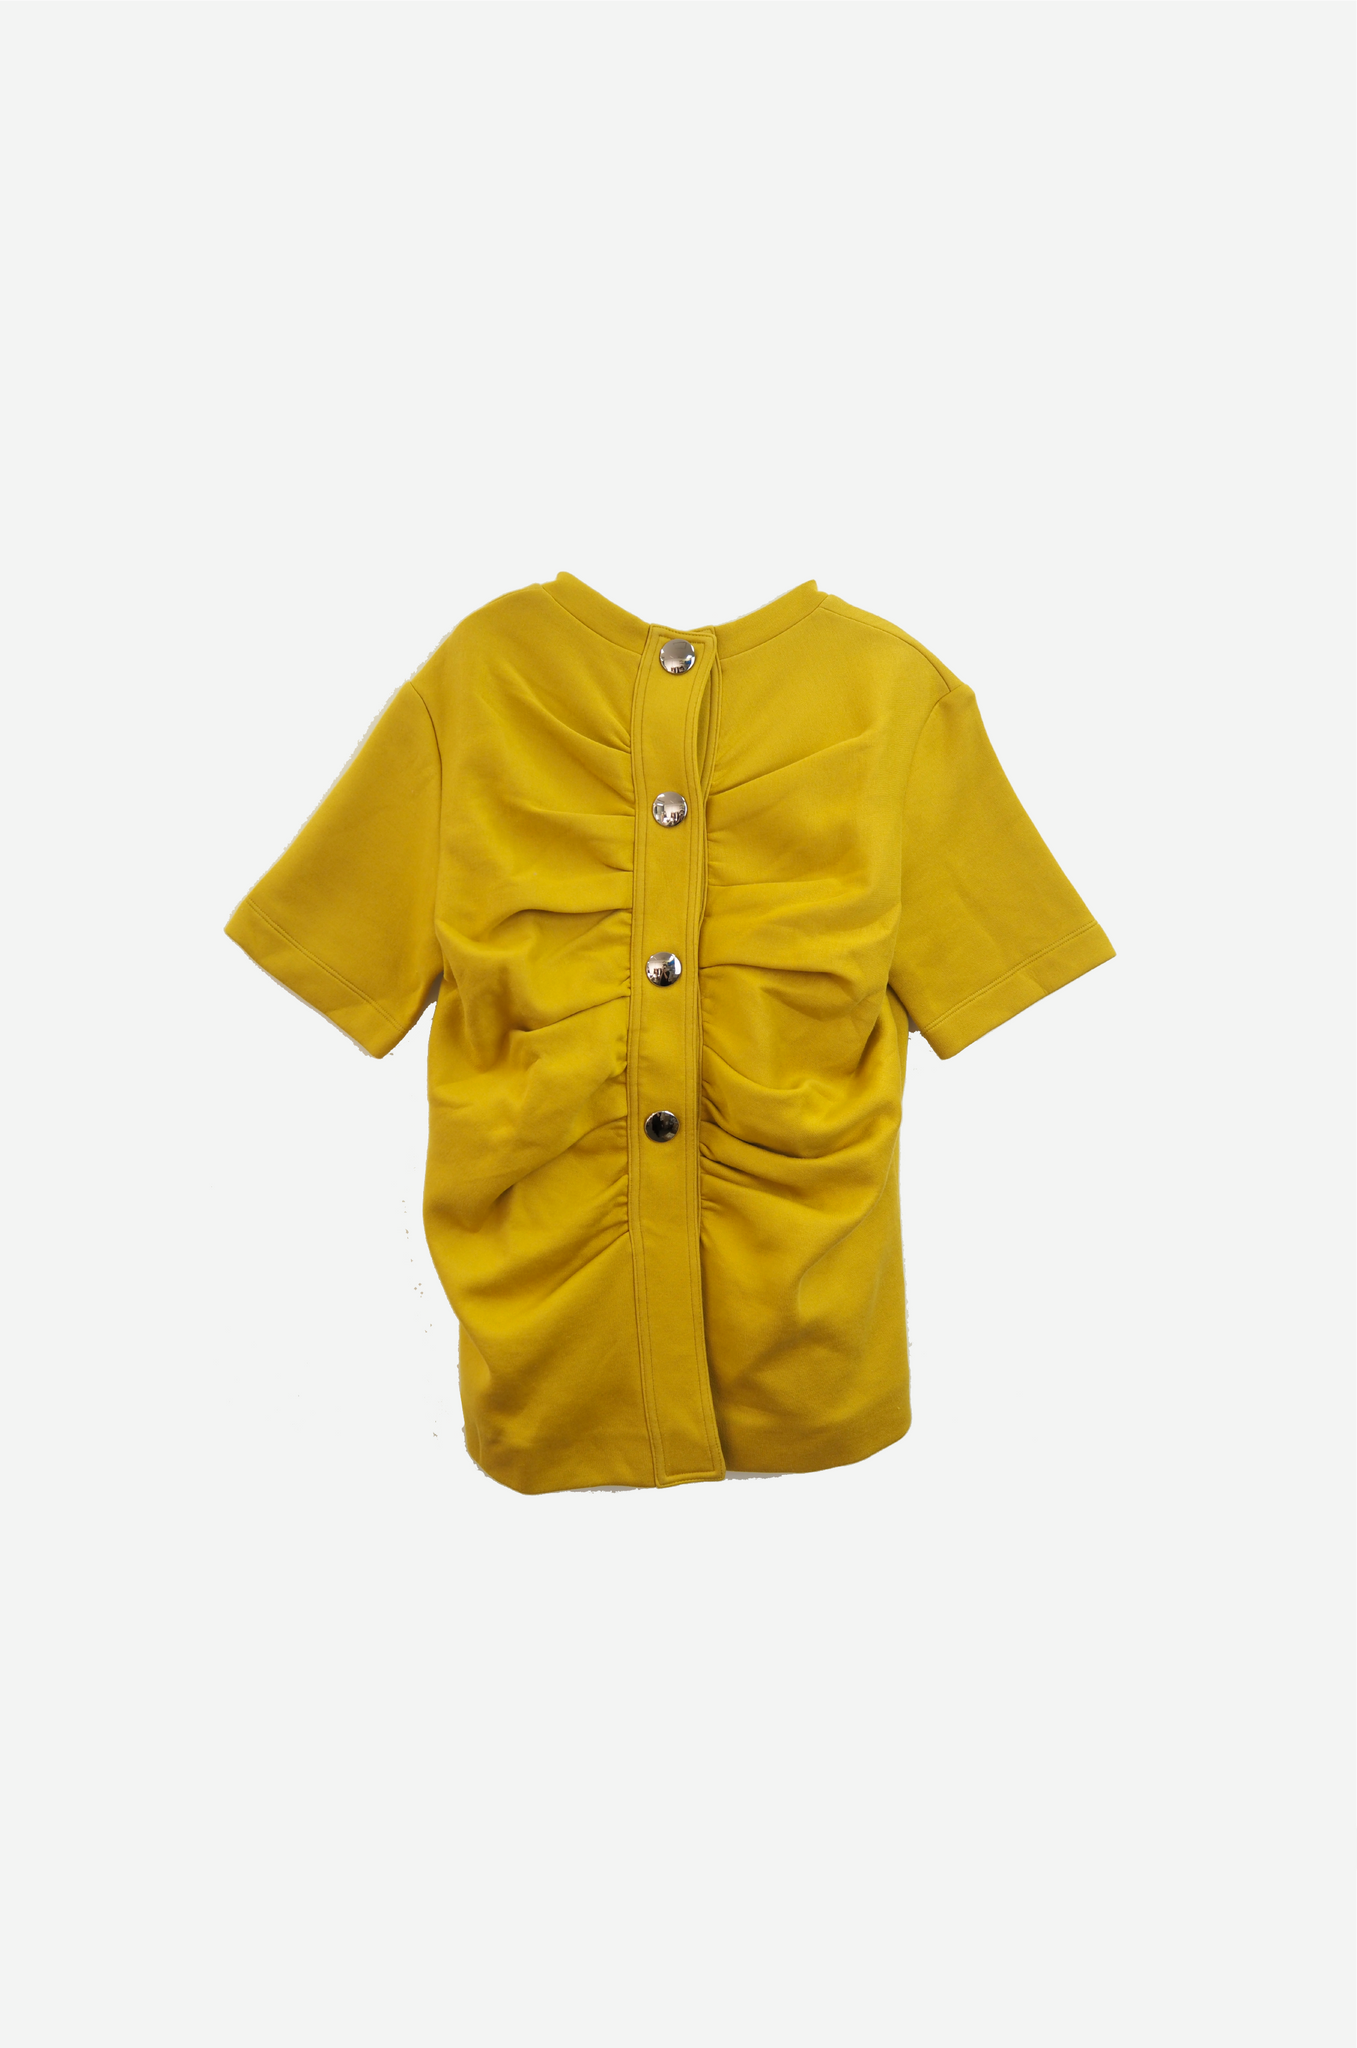 Archives Room: MARNI Top